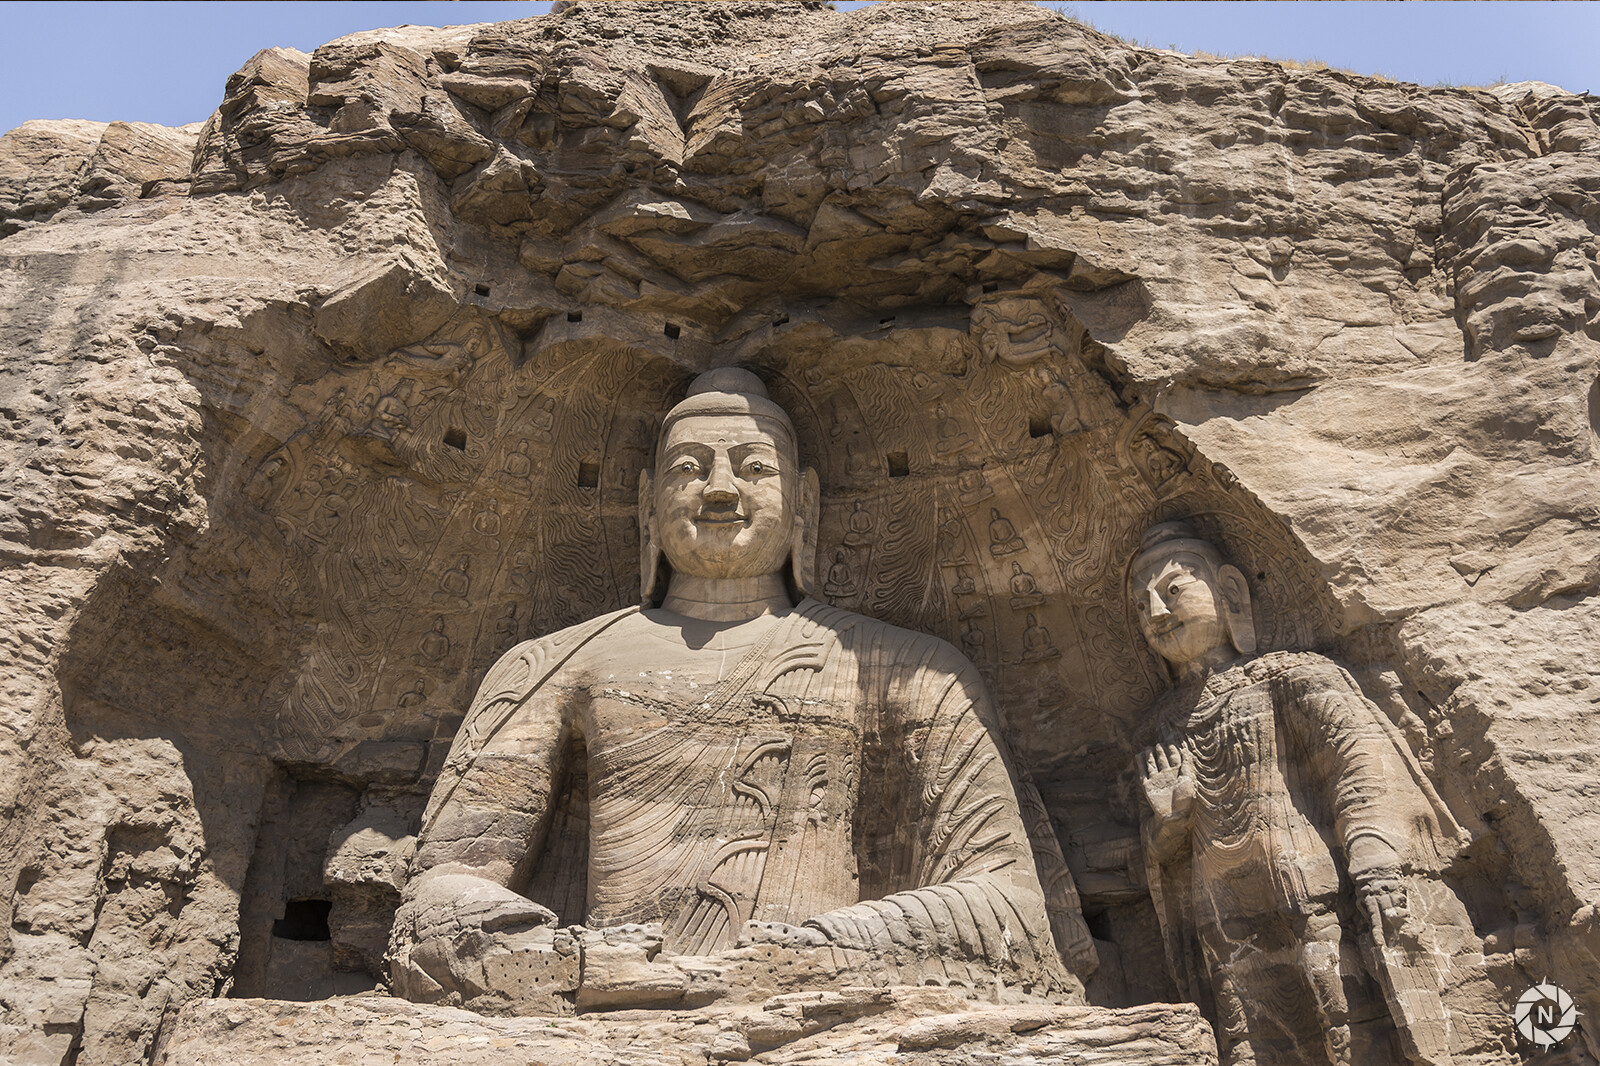 From the Photo Reference Pack: The Yungang Caves

https://www.artstation.com/a/165768